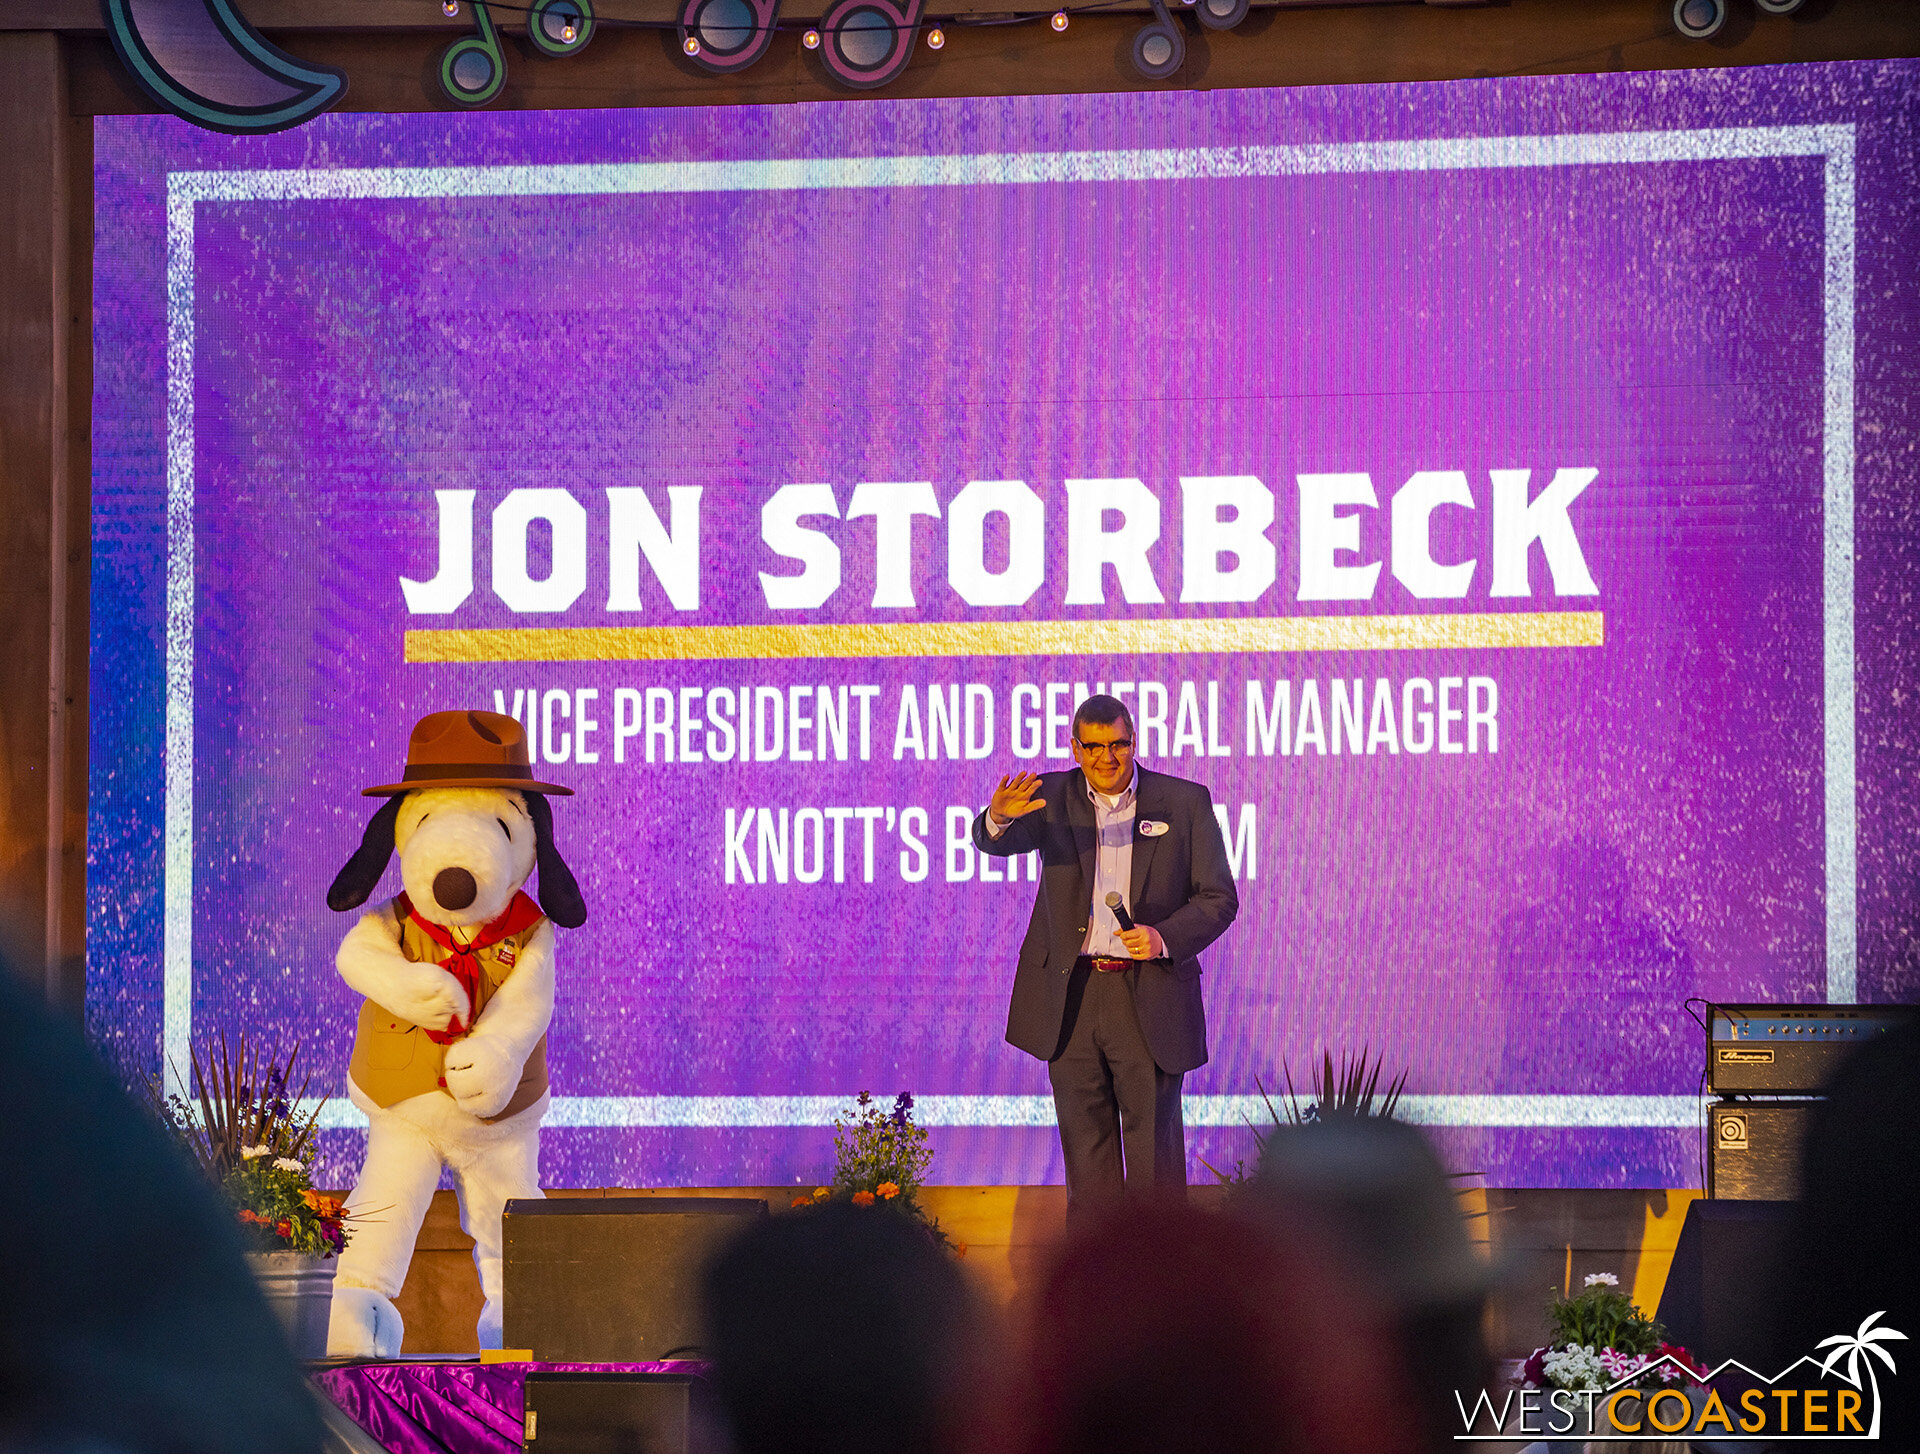  Next up is Knott’s GM Jon Storbeck.  And Snoopy! 